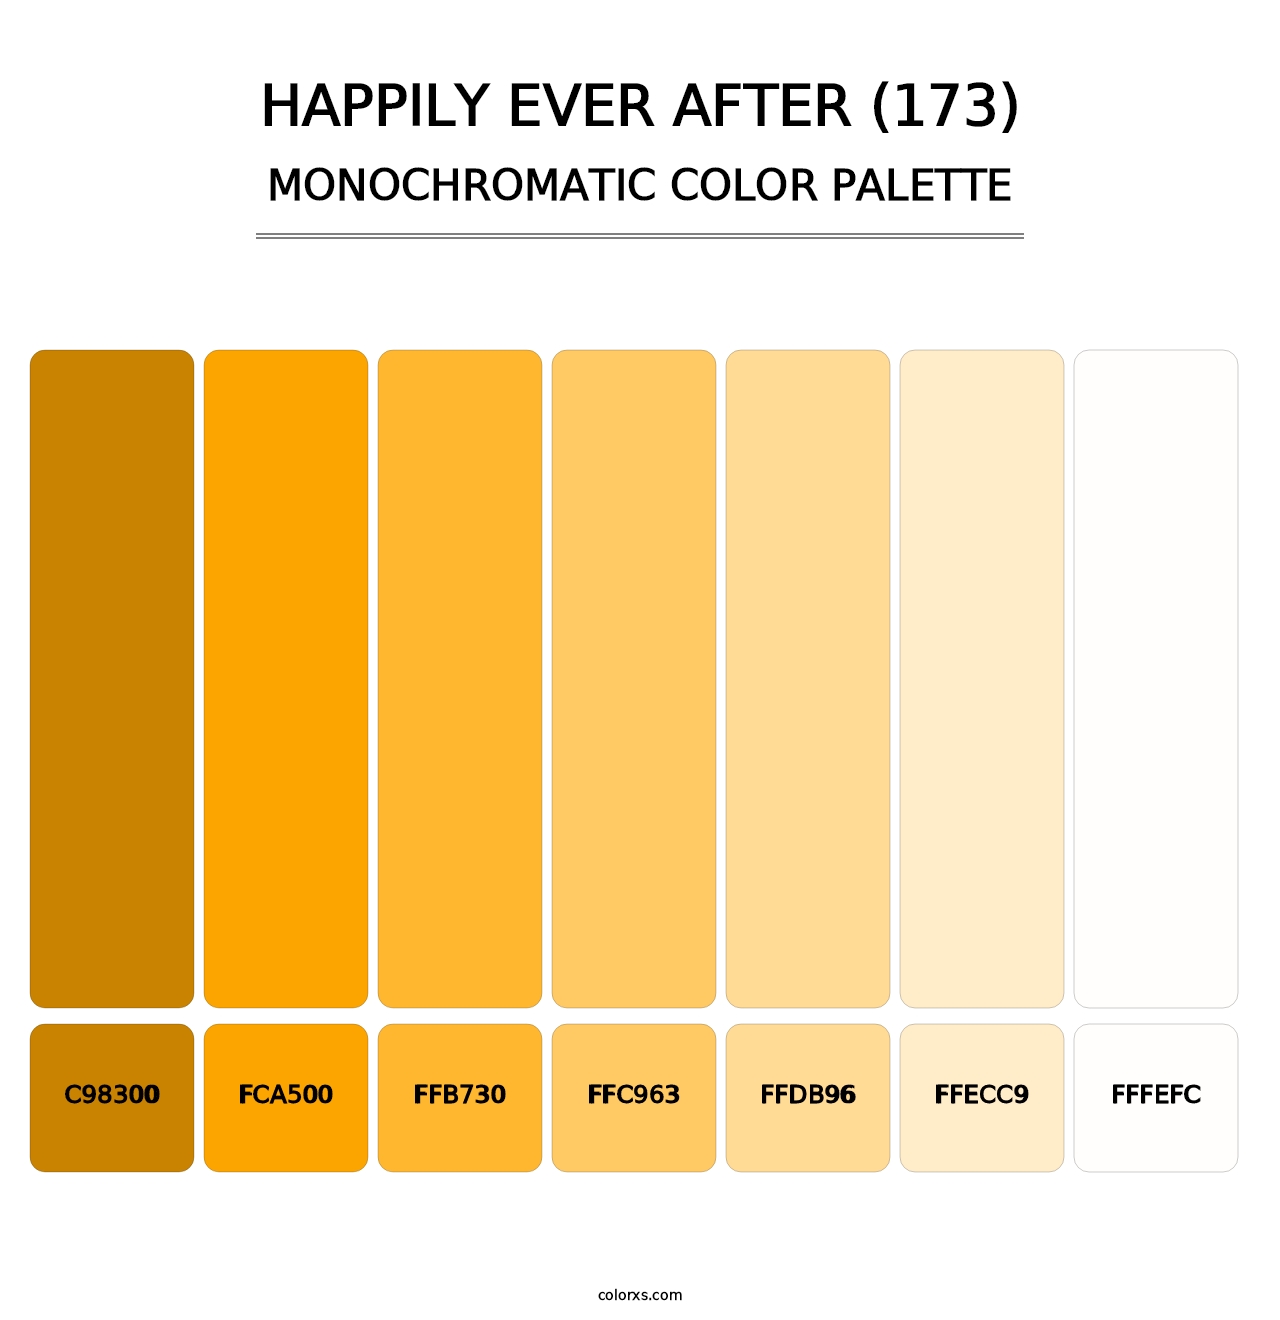 Happily Ever After (173) - Monochromatic Color Palette